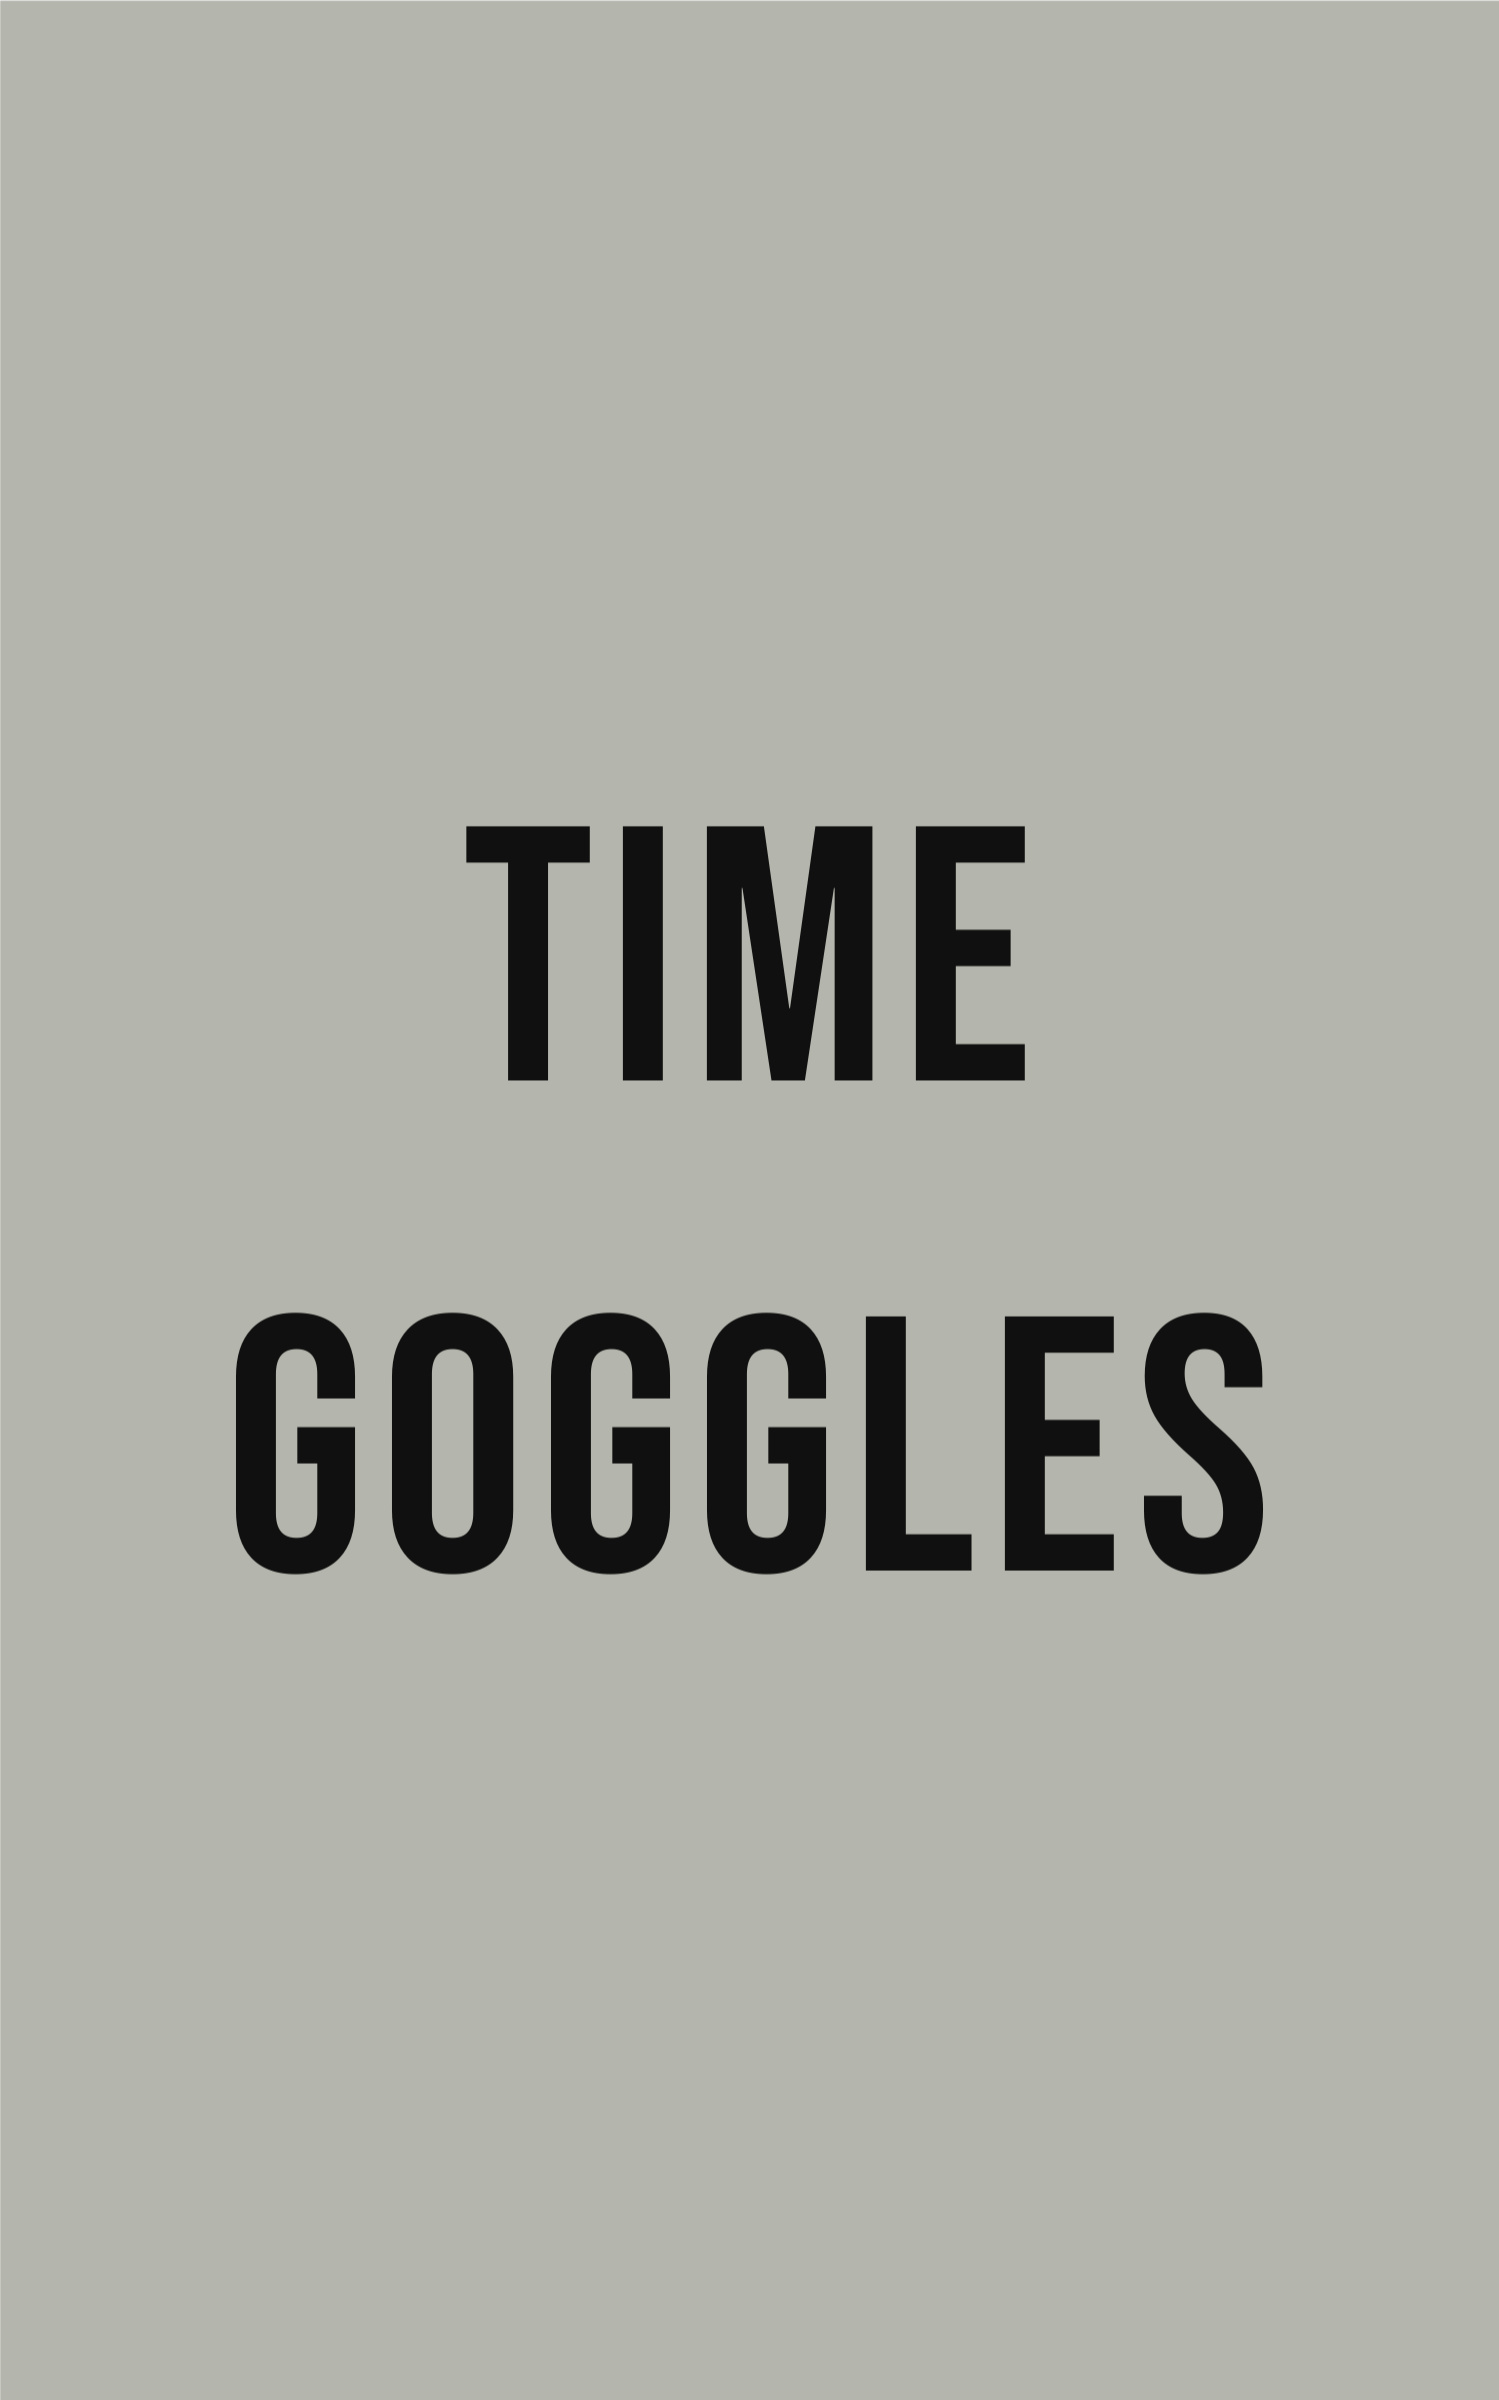 Placeholder cover image for Time Goggles screenplay